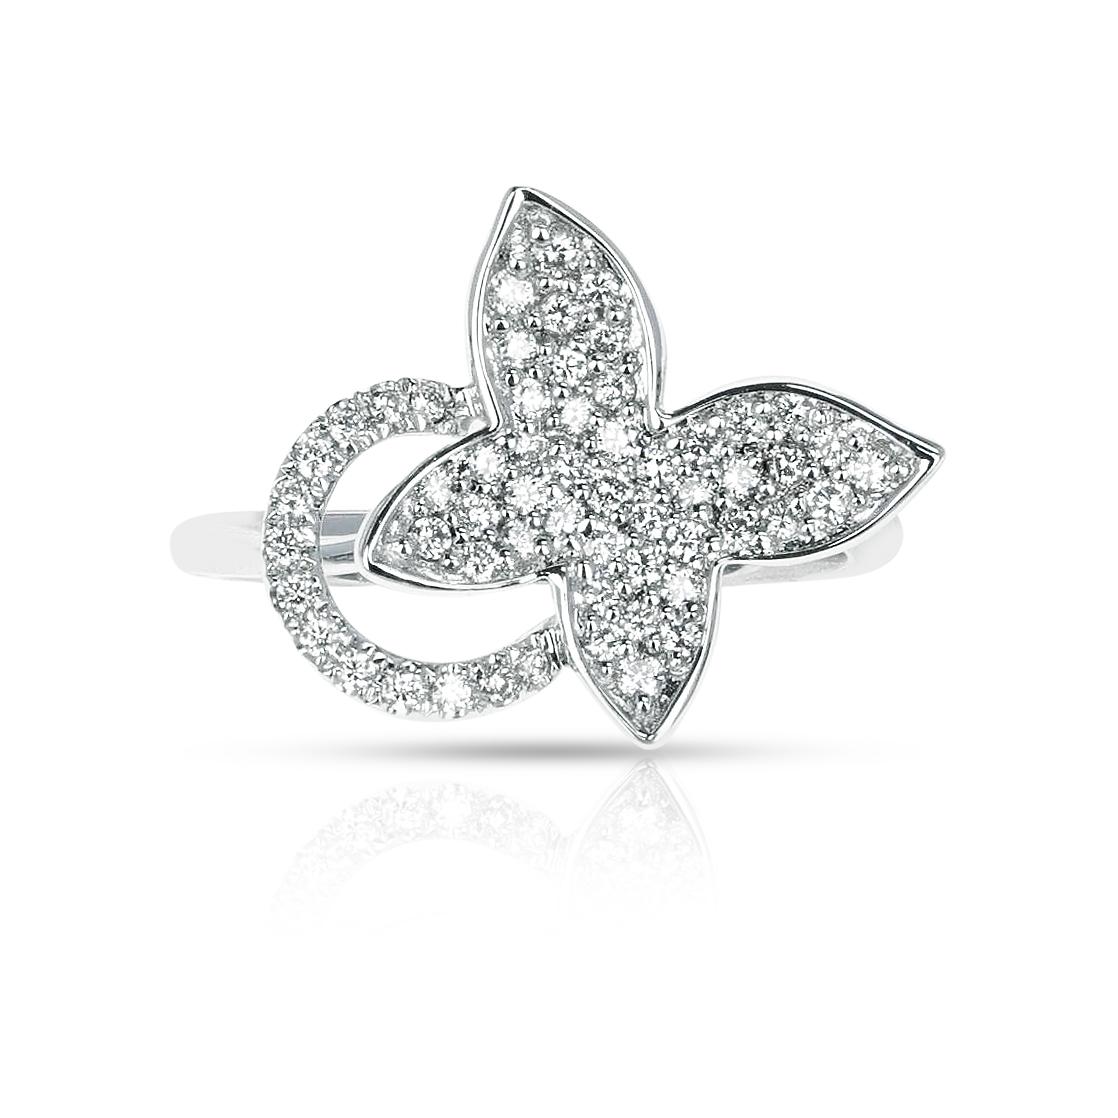 A Butterfly and Halo Diamond Ring made in 18 Karat White Gold by Piero Milano. The ring size is US 6.25. 